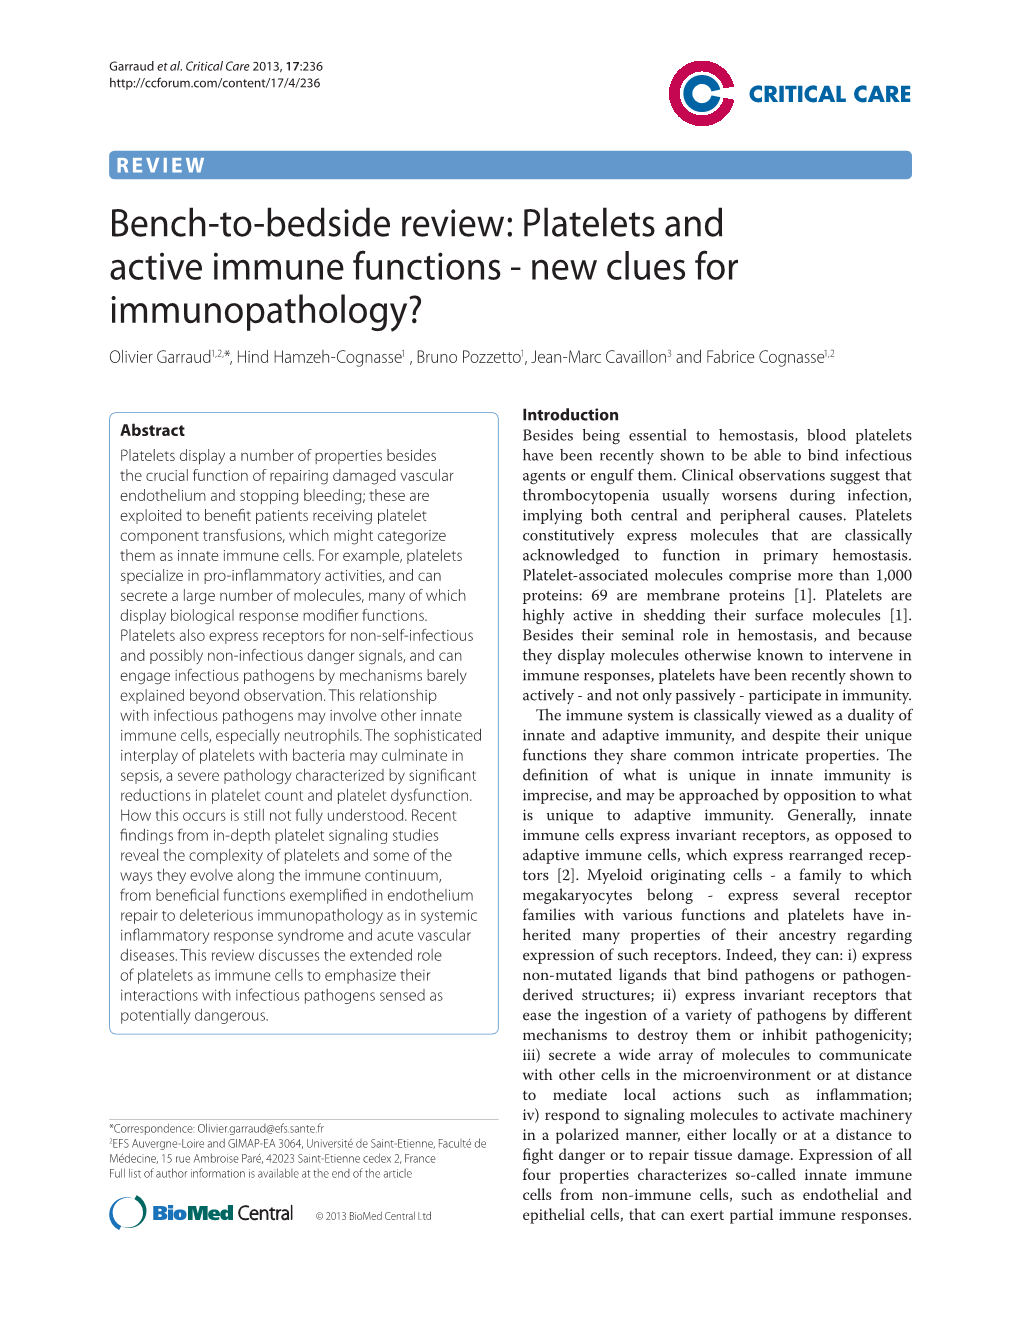 Bench-To-Bedside Review: Platelets and Active Immune Functions - New Clues for Immunopathology?